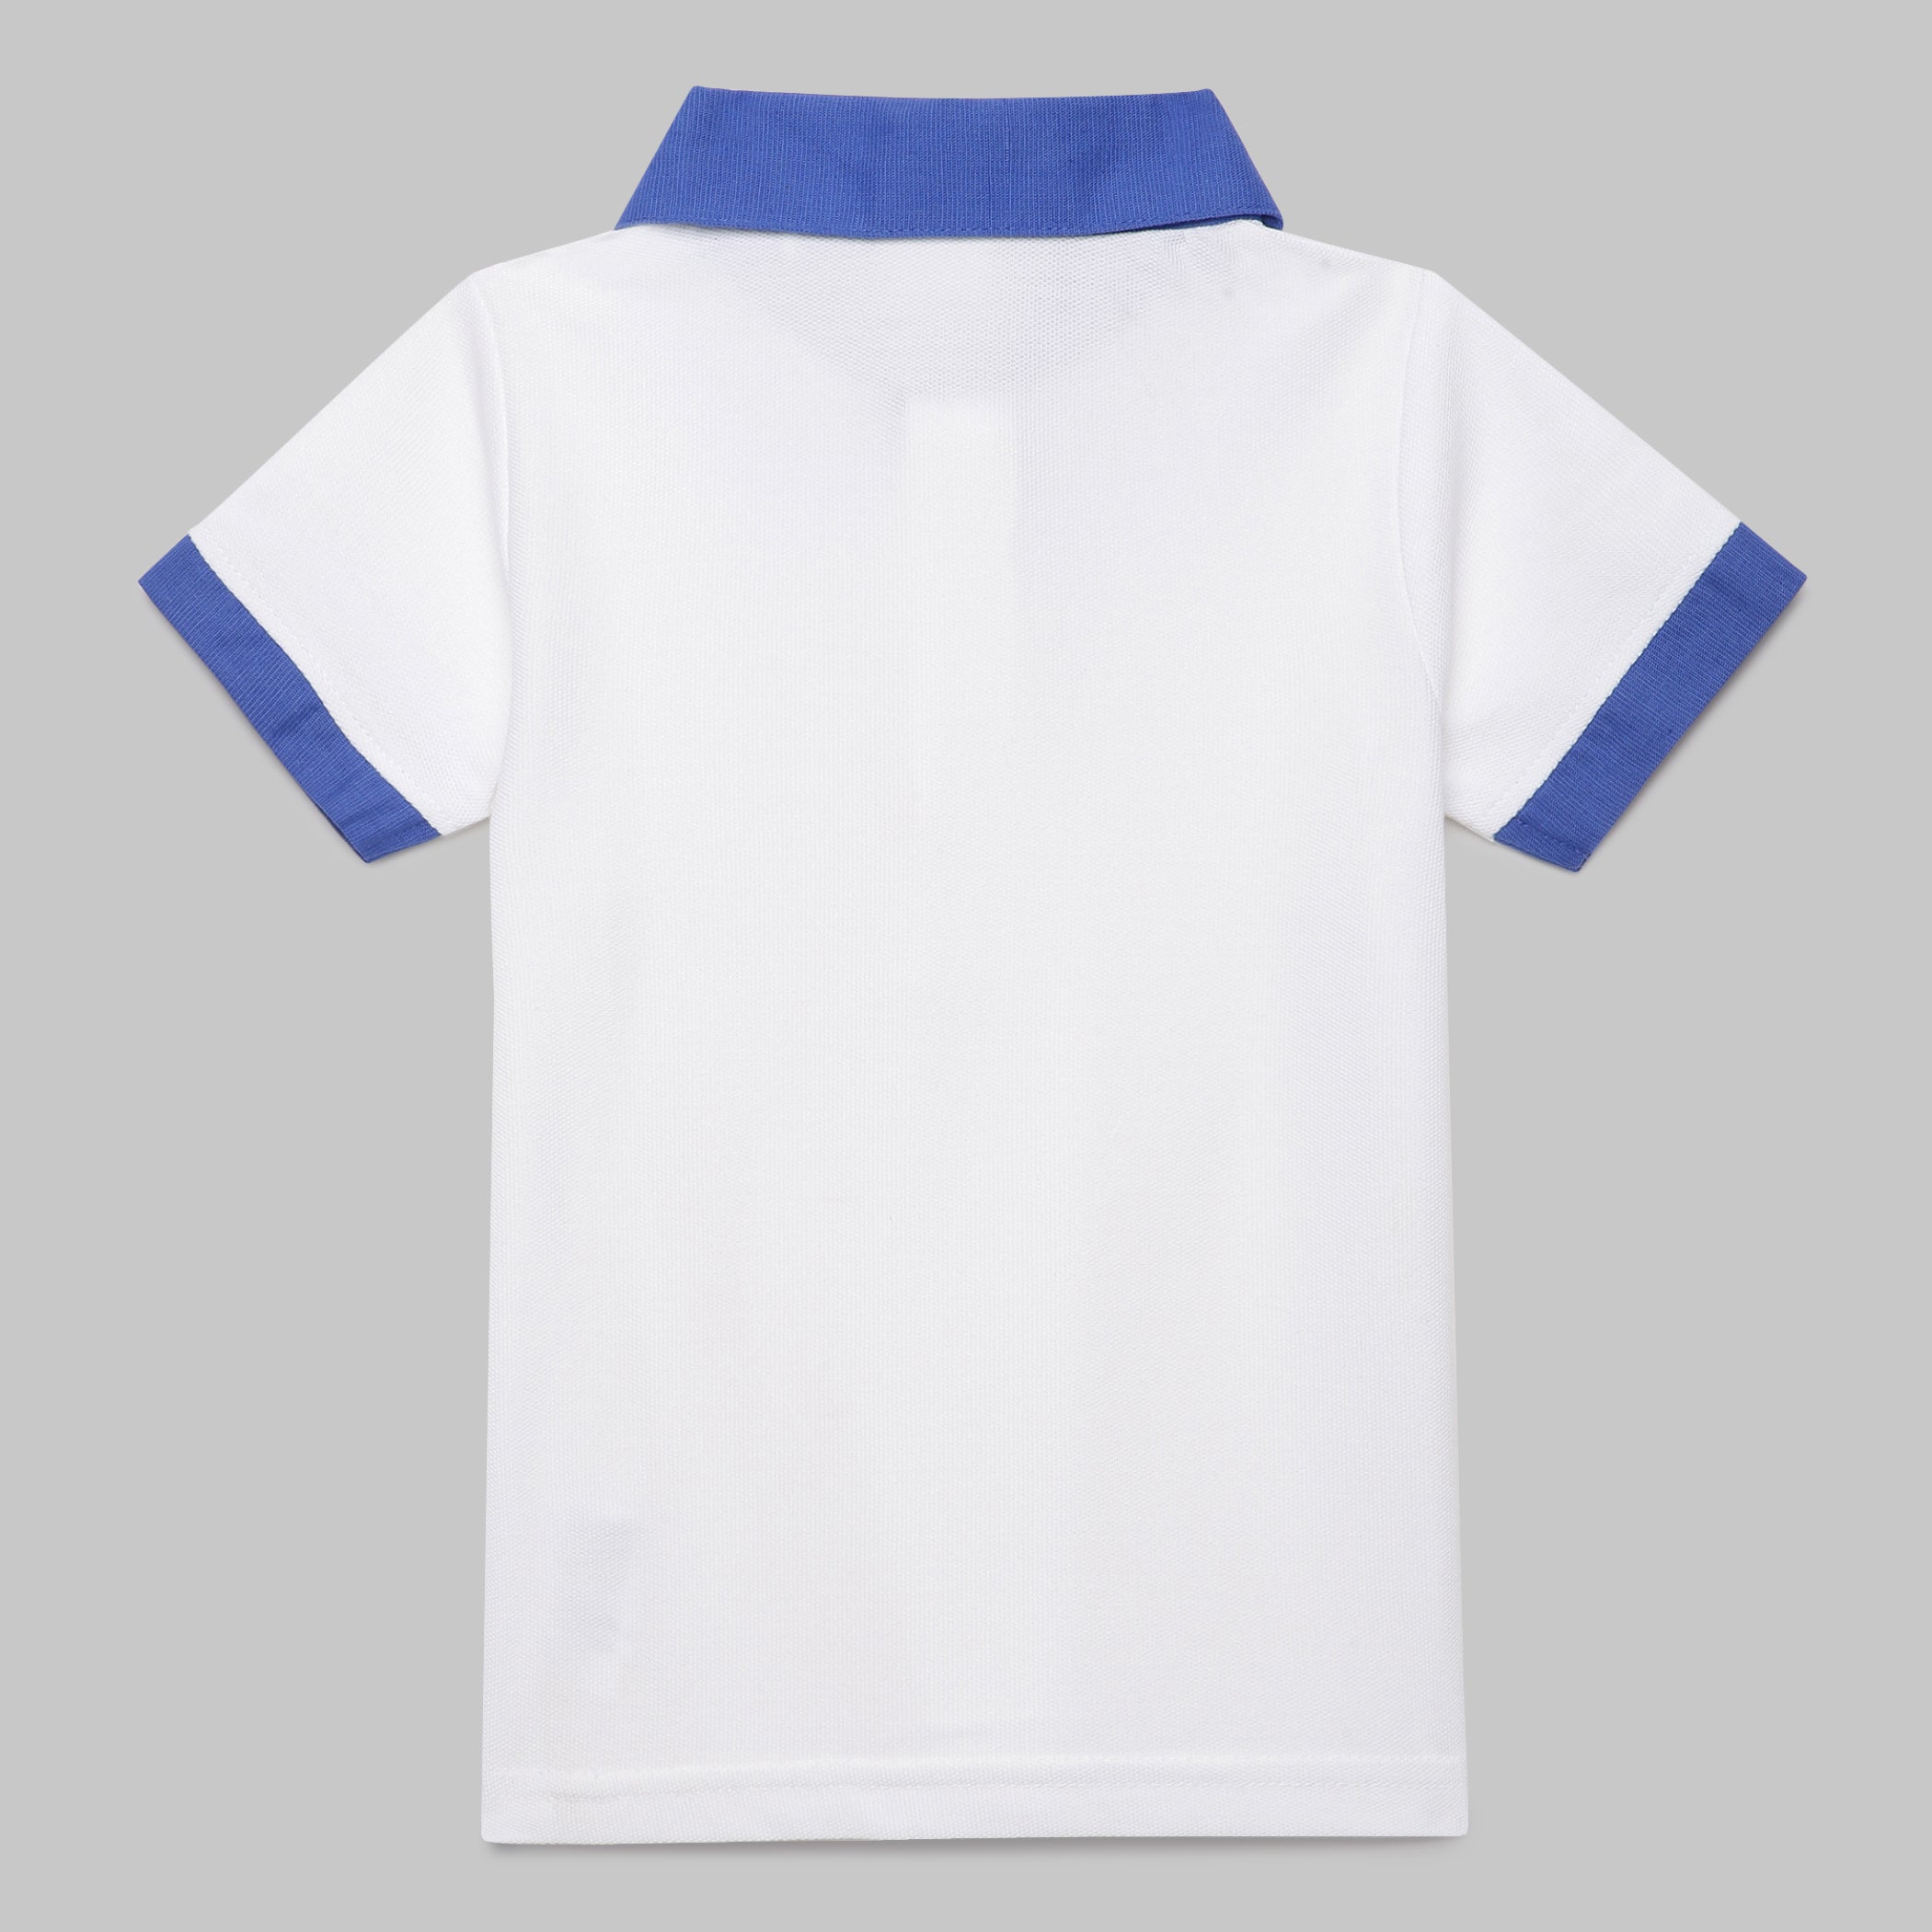 Baby Boys Half Sleeve T-Shirt with Suspender Shorts